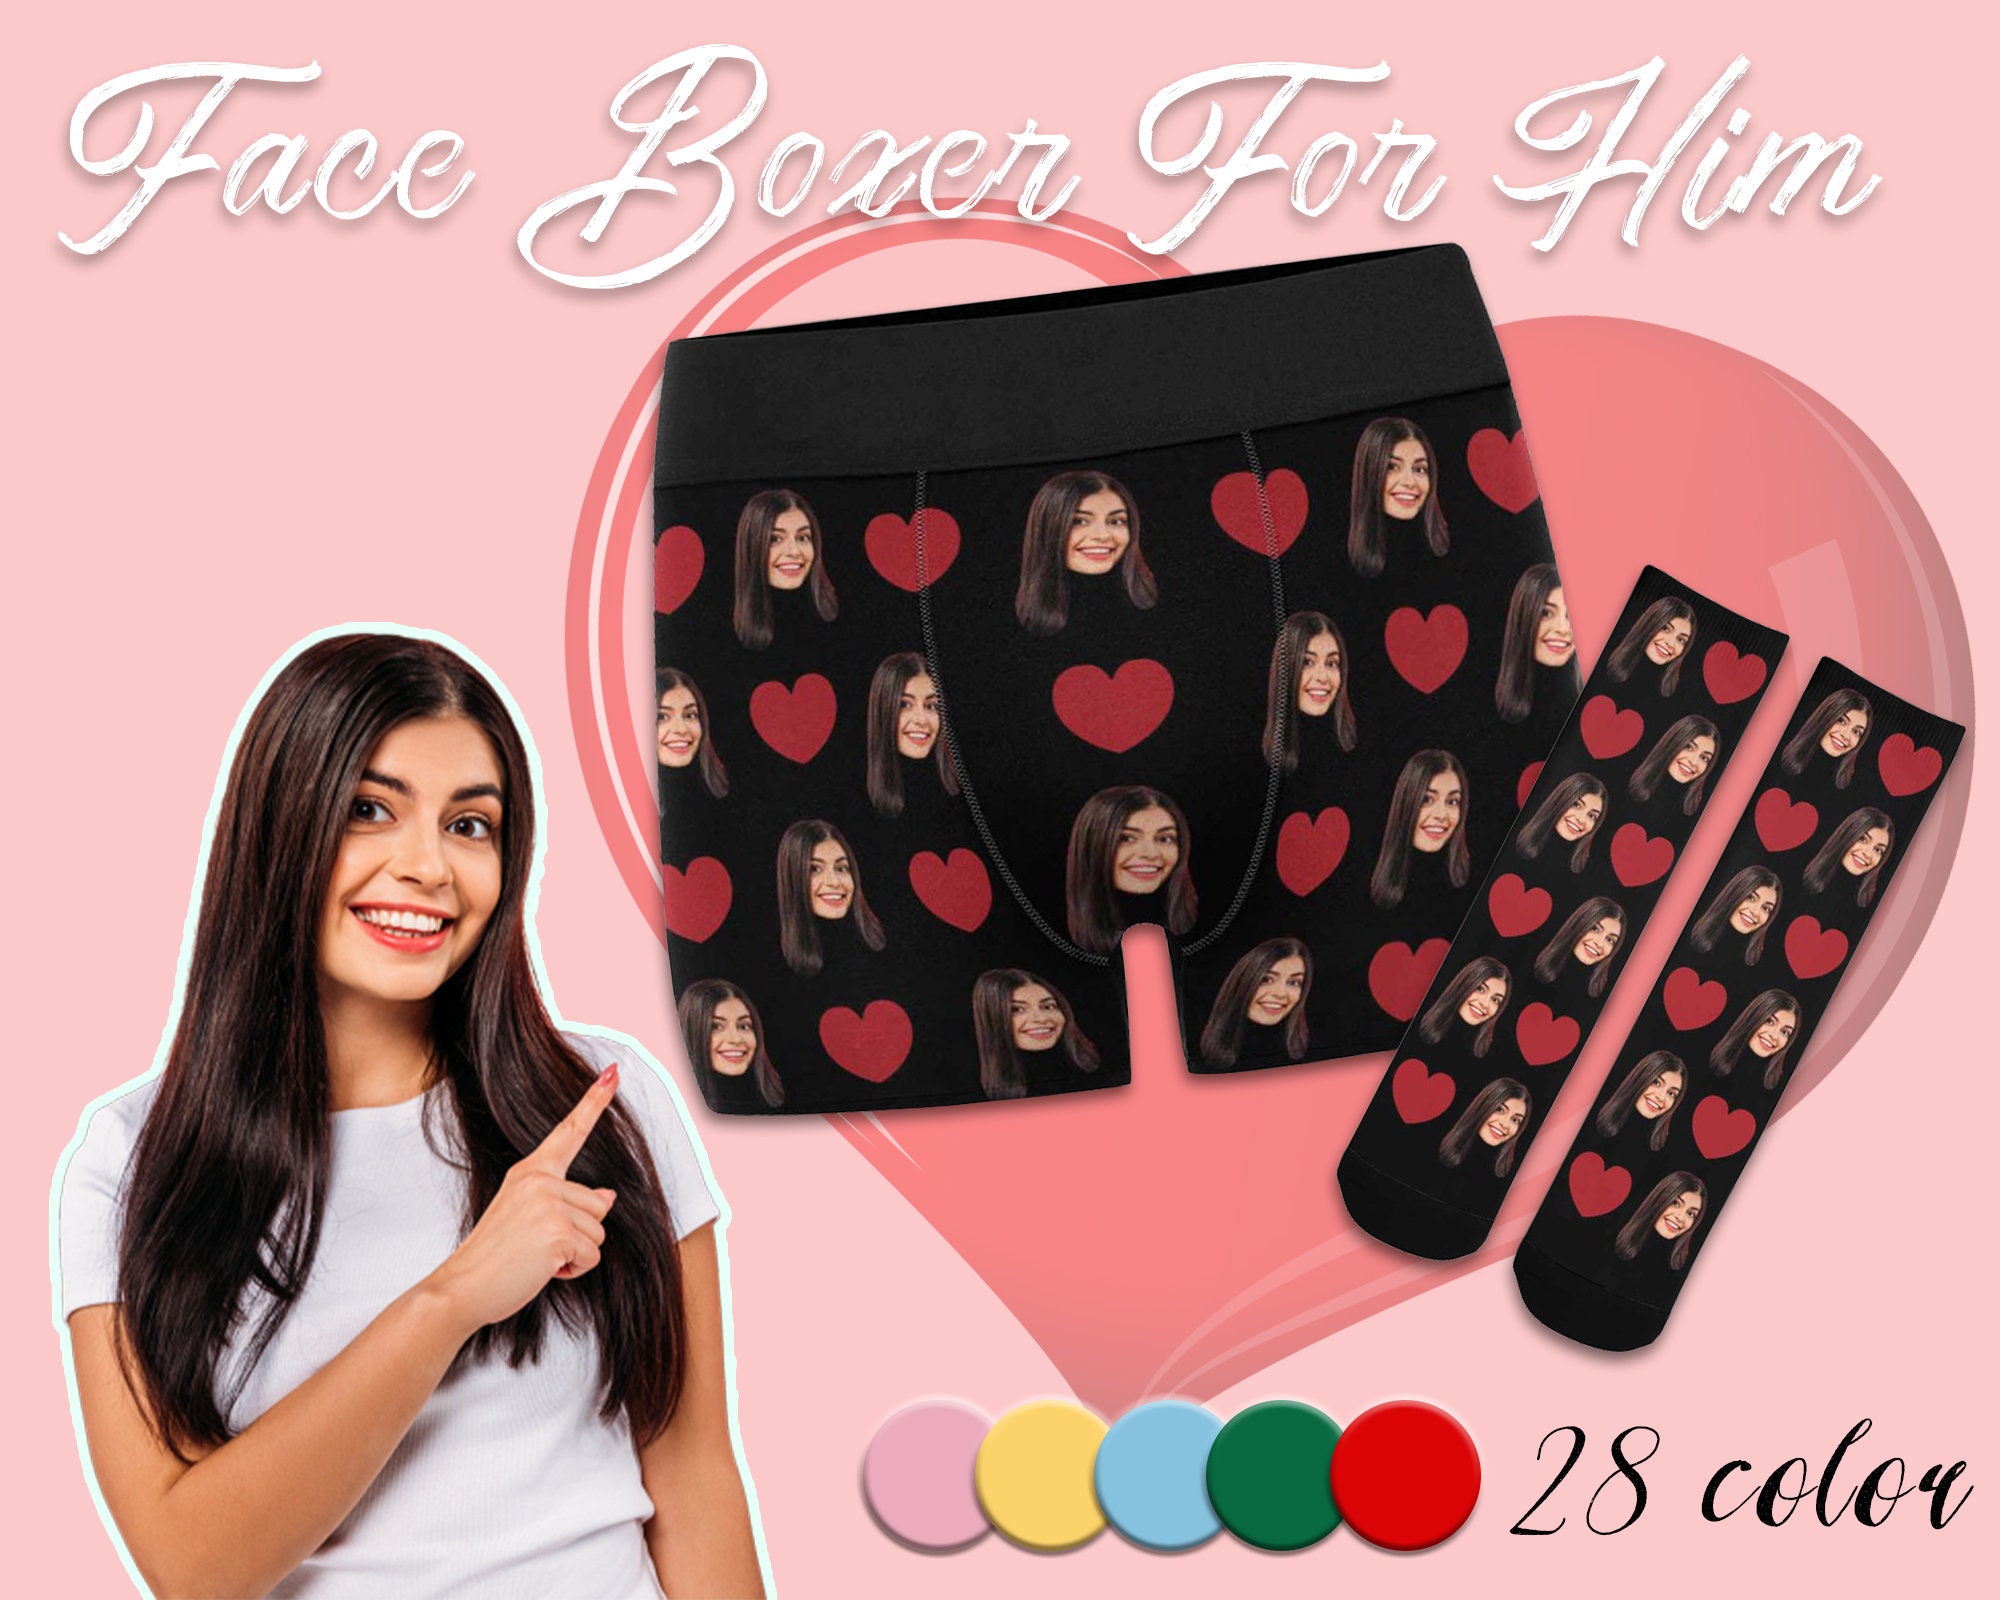 Your Face on Custom Men's Boxers With Hearts, Personalized Funny Boxer  Briefs, Underpants, Face Underwear, Valentine's Day Gift for Him 